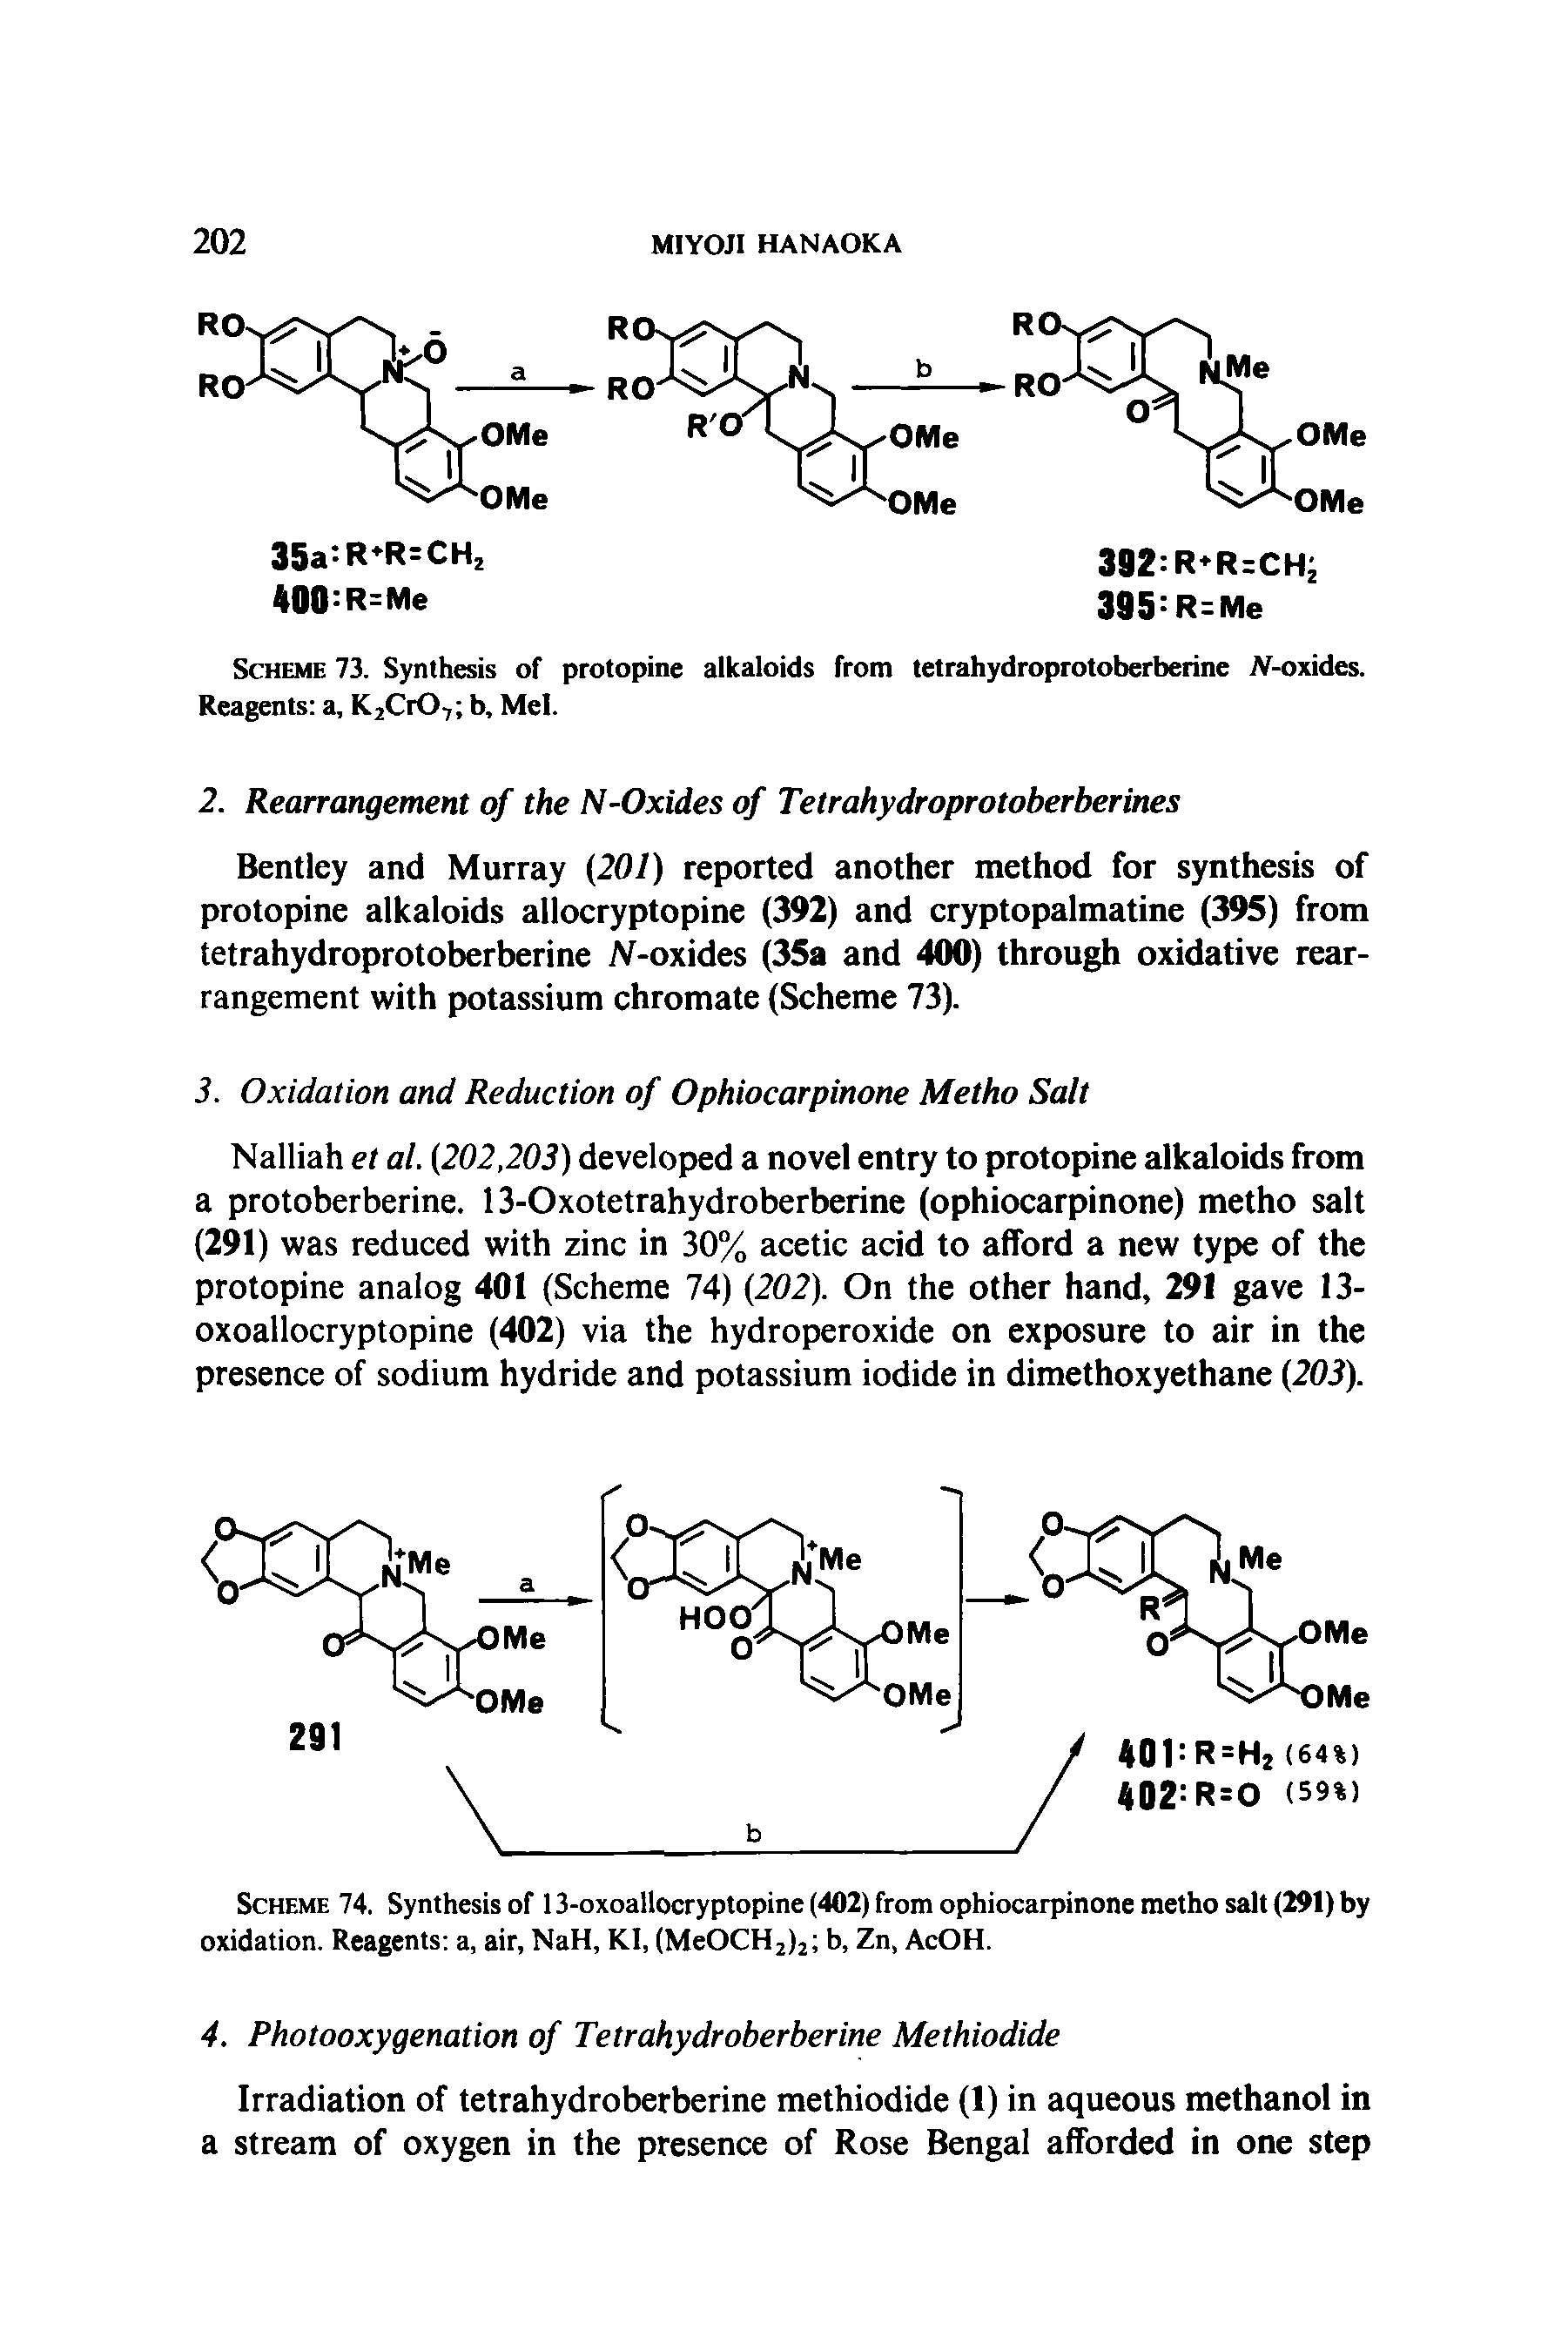 Scheme 74. Synthesis of 13-oxoallocryptopine (402) from ophiocarpinone metho salt (291) by oxidation. Reagents a, air, NaH, KI, (MeOCH2)2 b, Zn, AcOH.